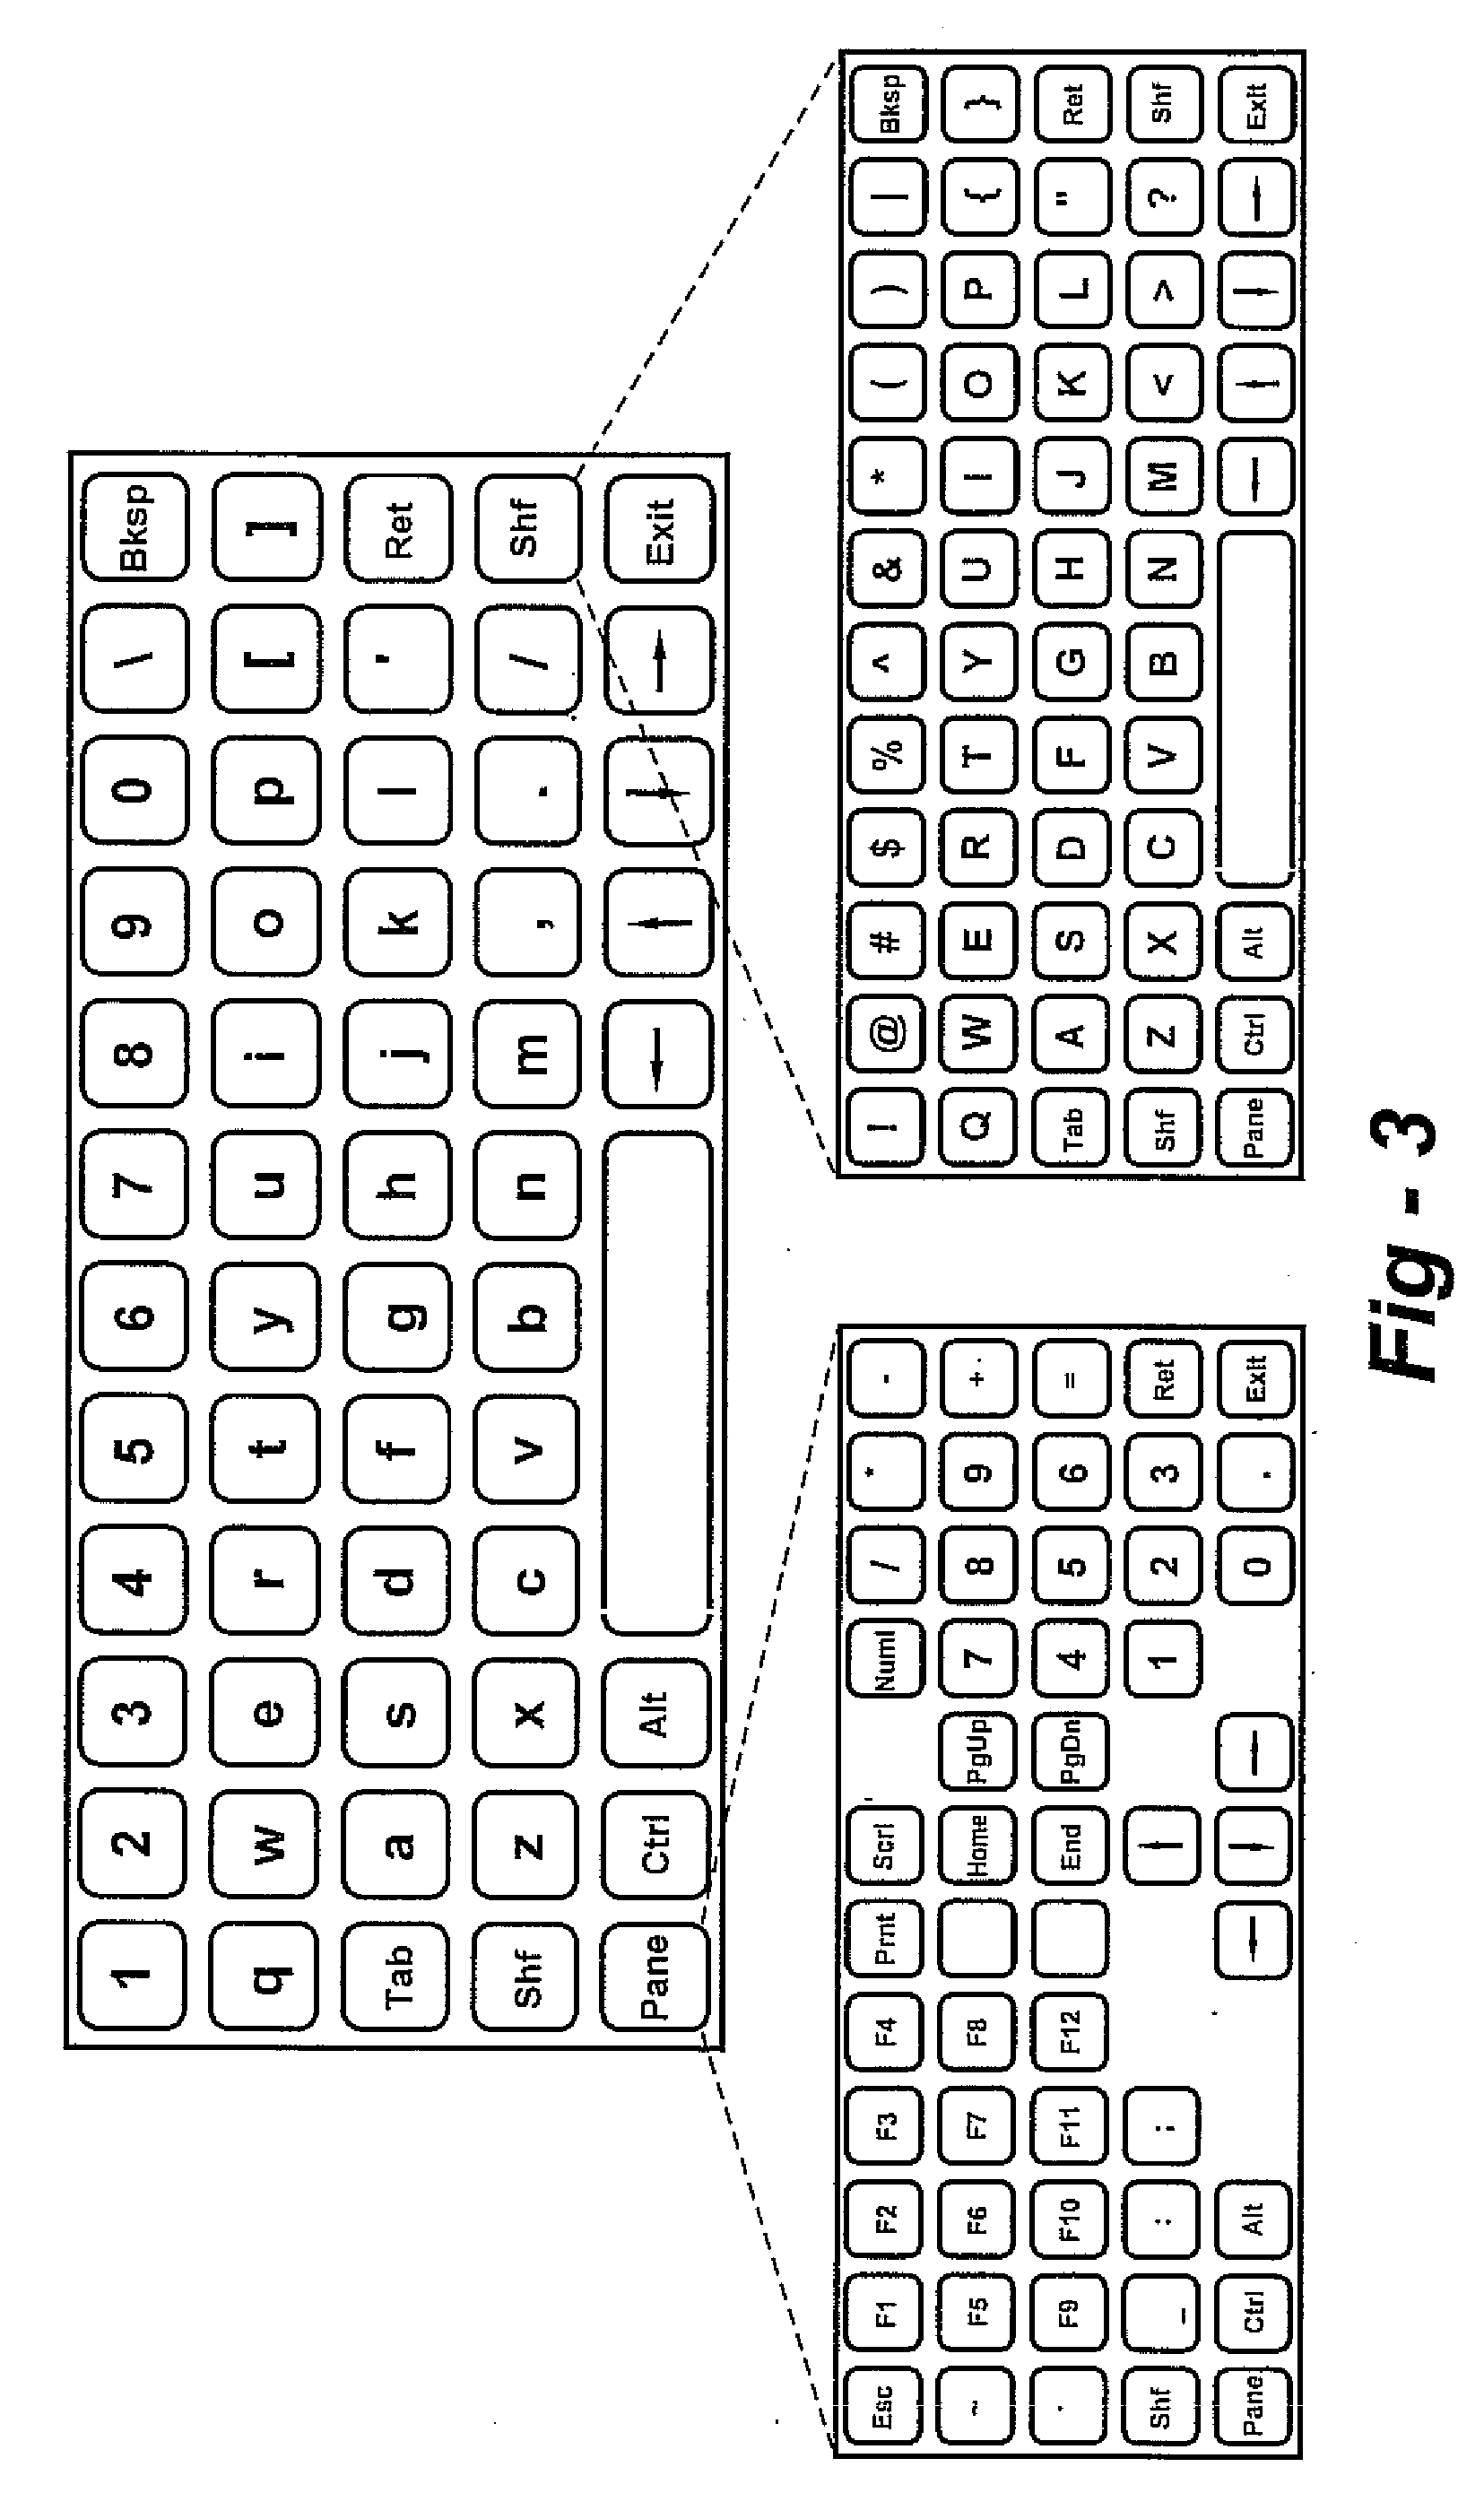 Method for controlling a graphical user interface for touchscreen-enabled computer systems